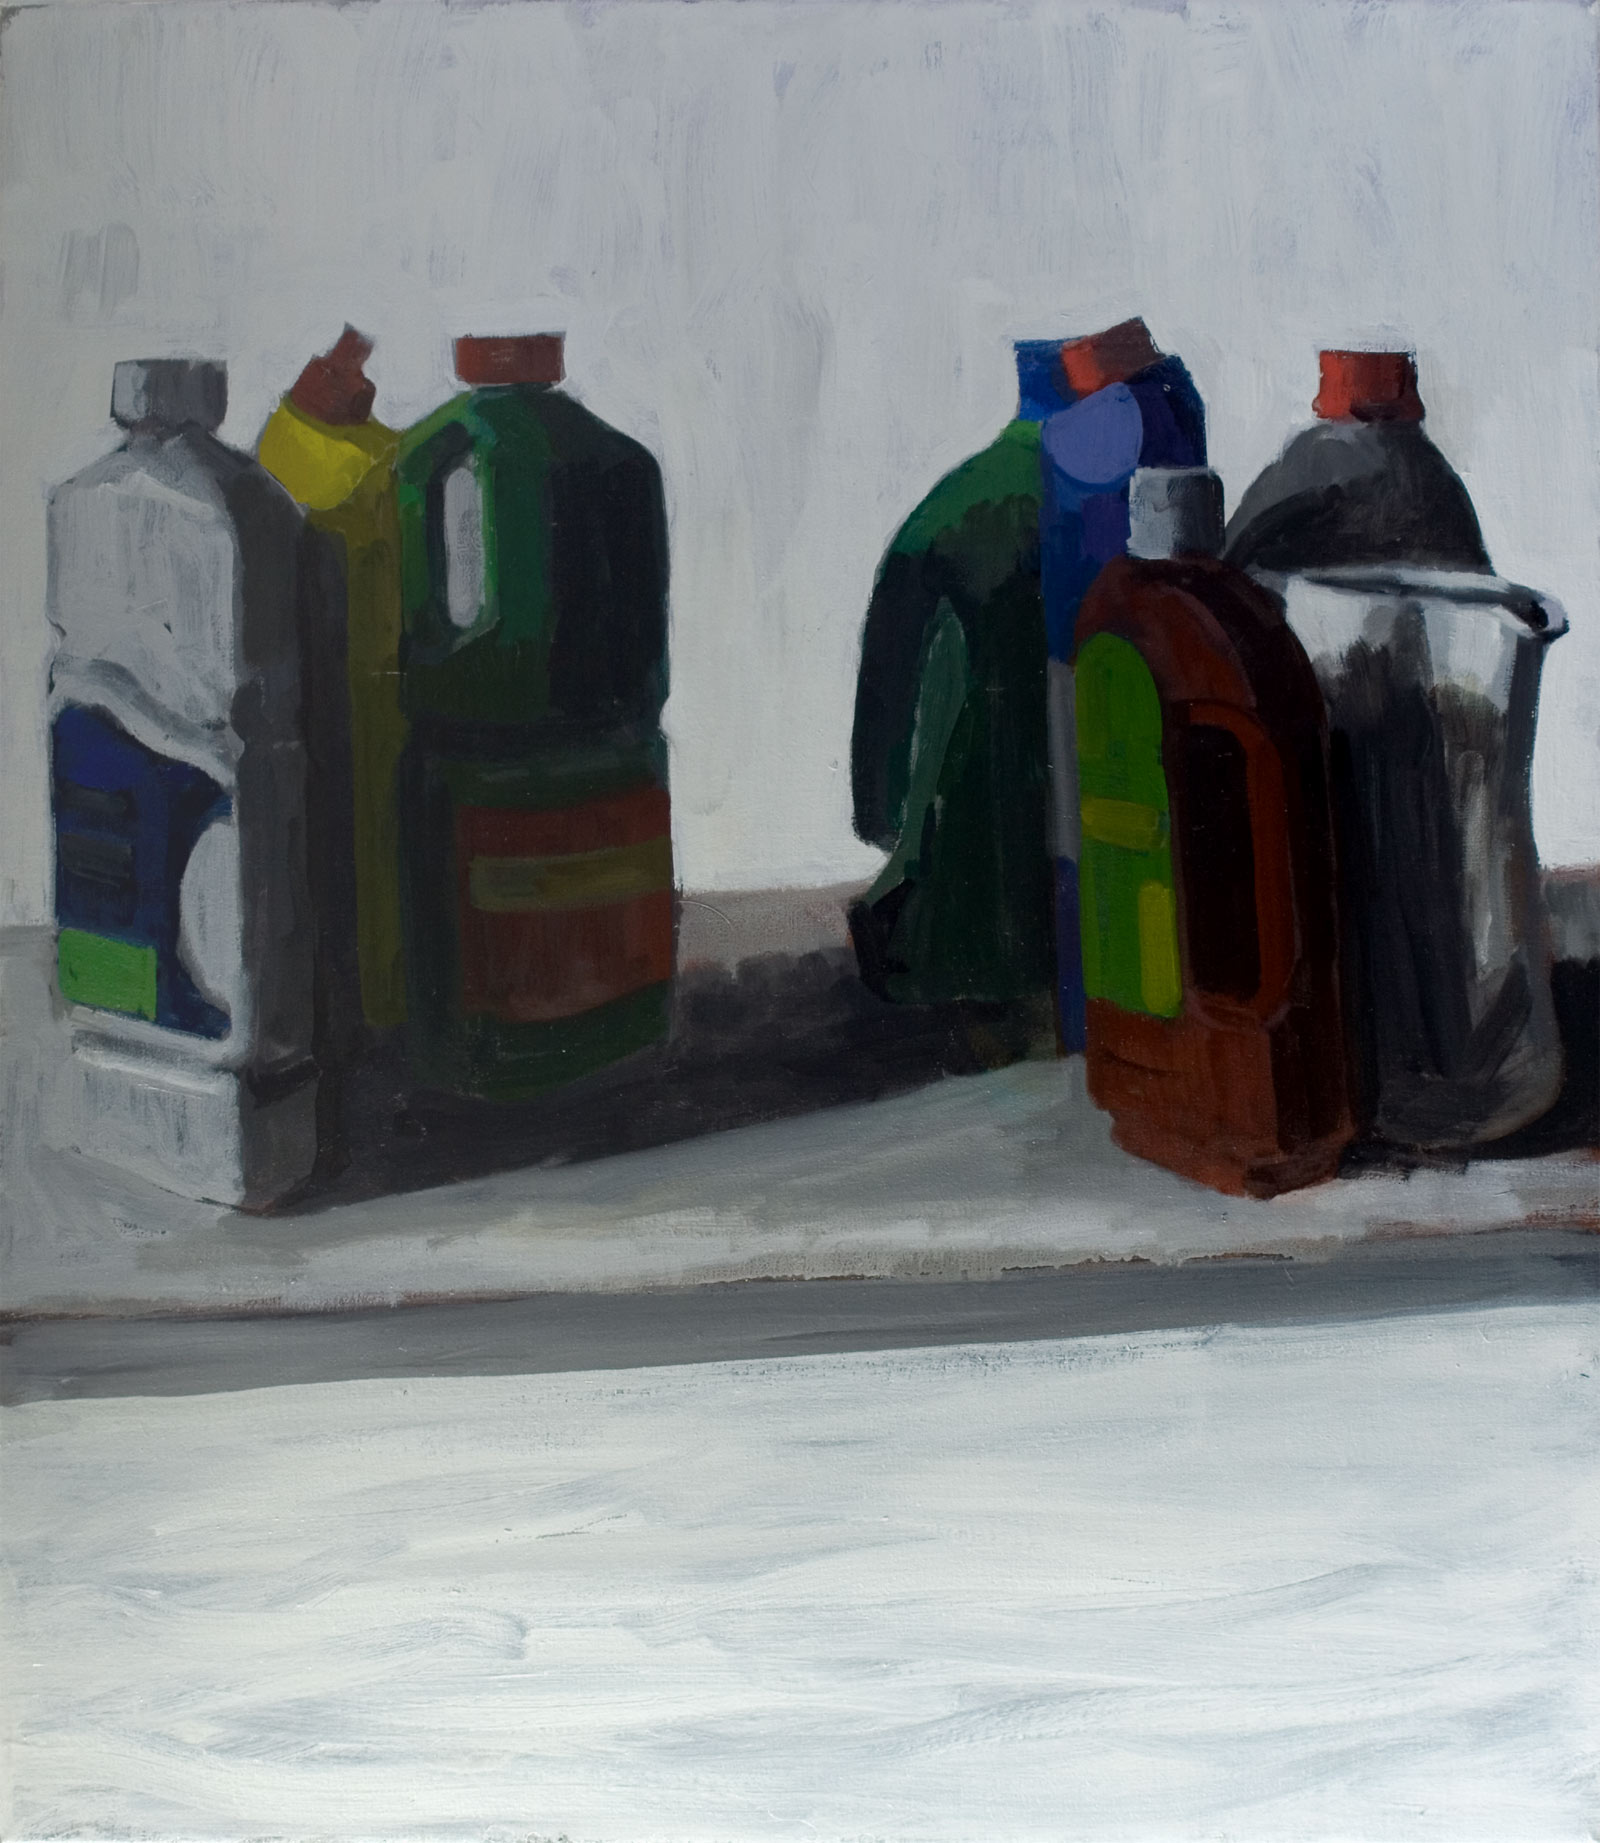 Two groups of bottles